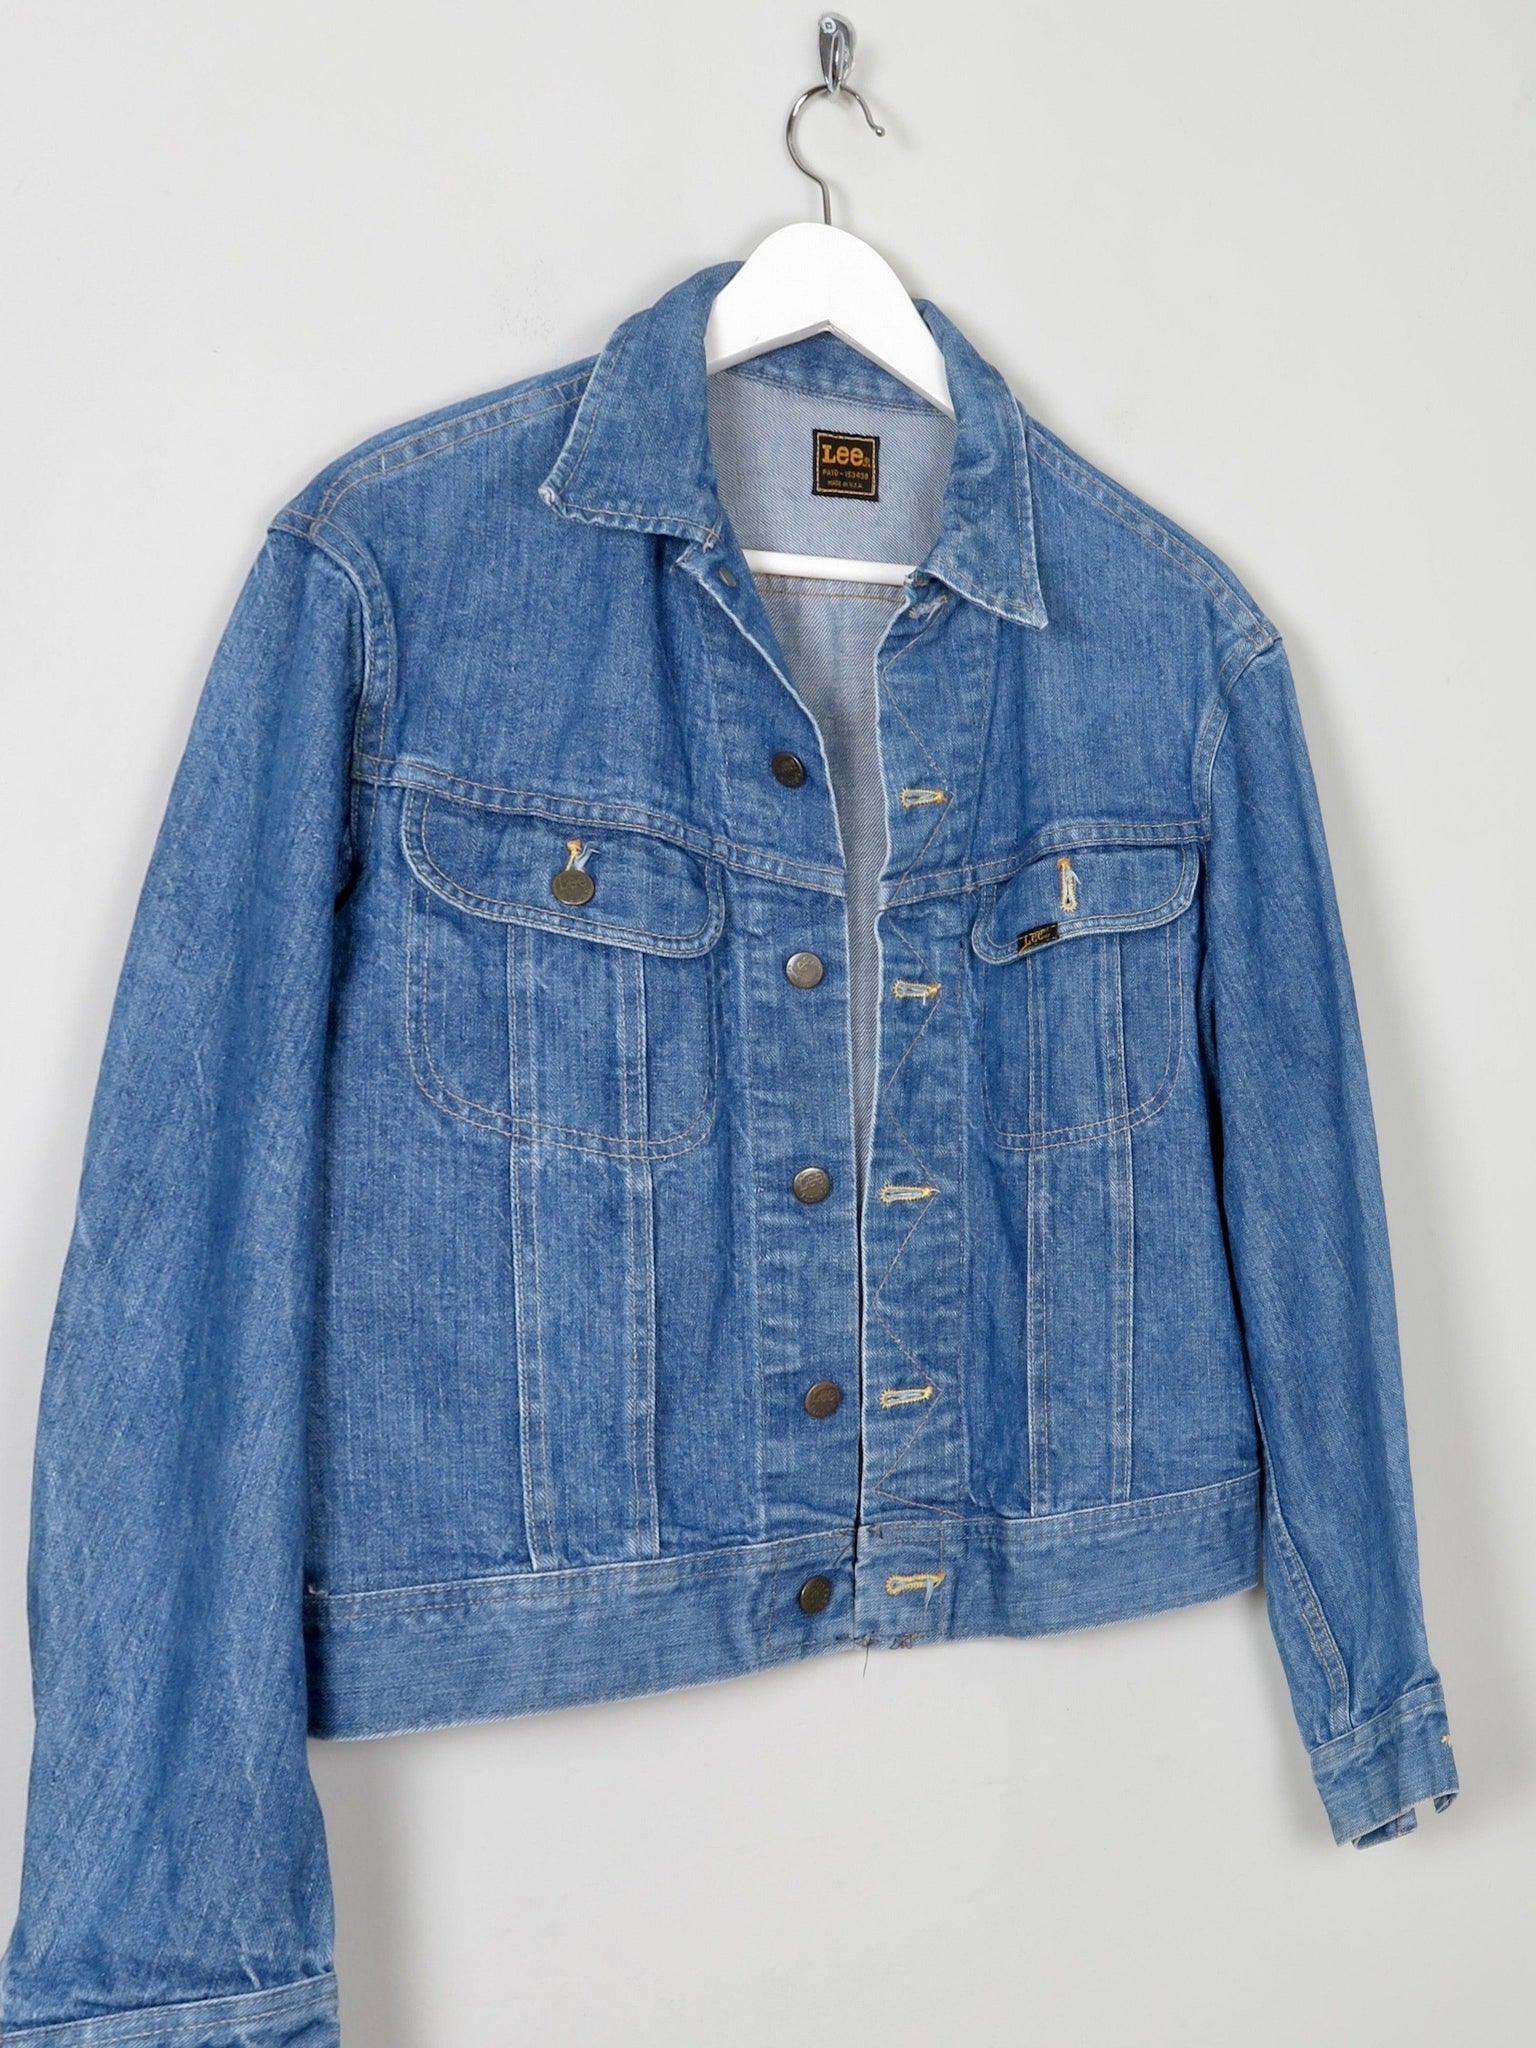 OrSlow 1950s Coverall Denim Jacket - One Wash -03-6140-81